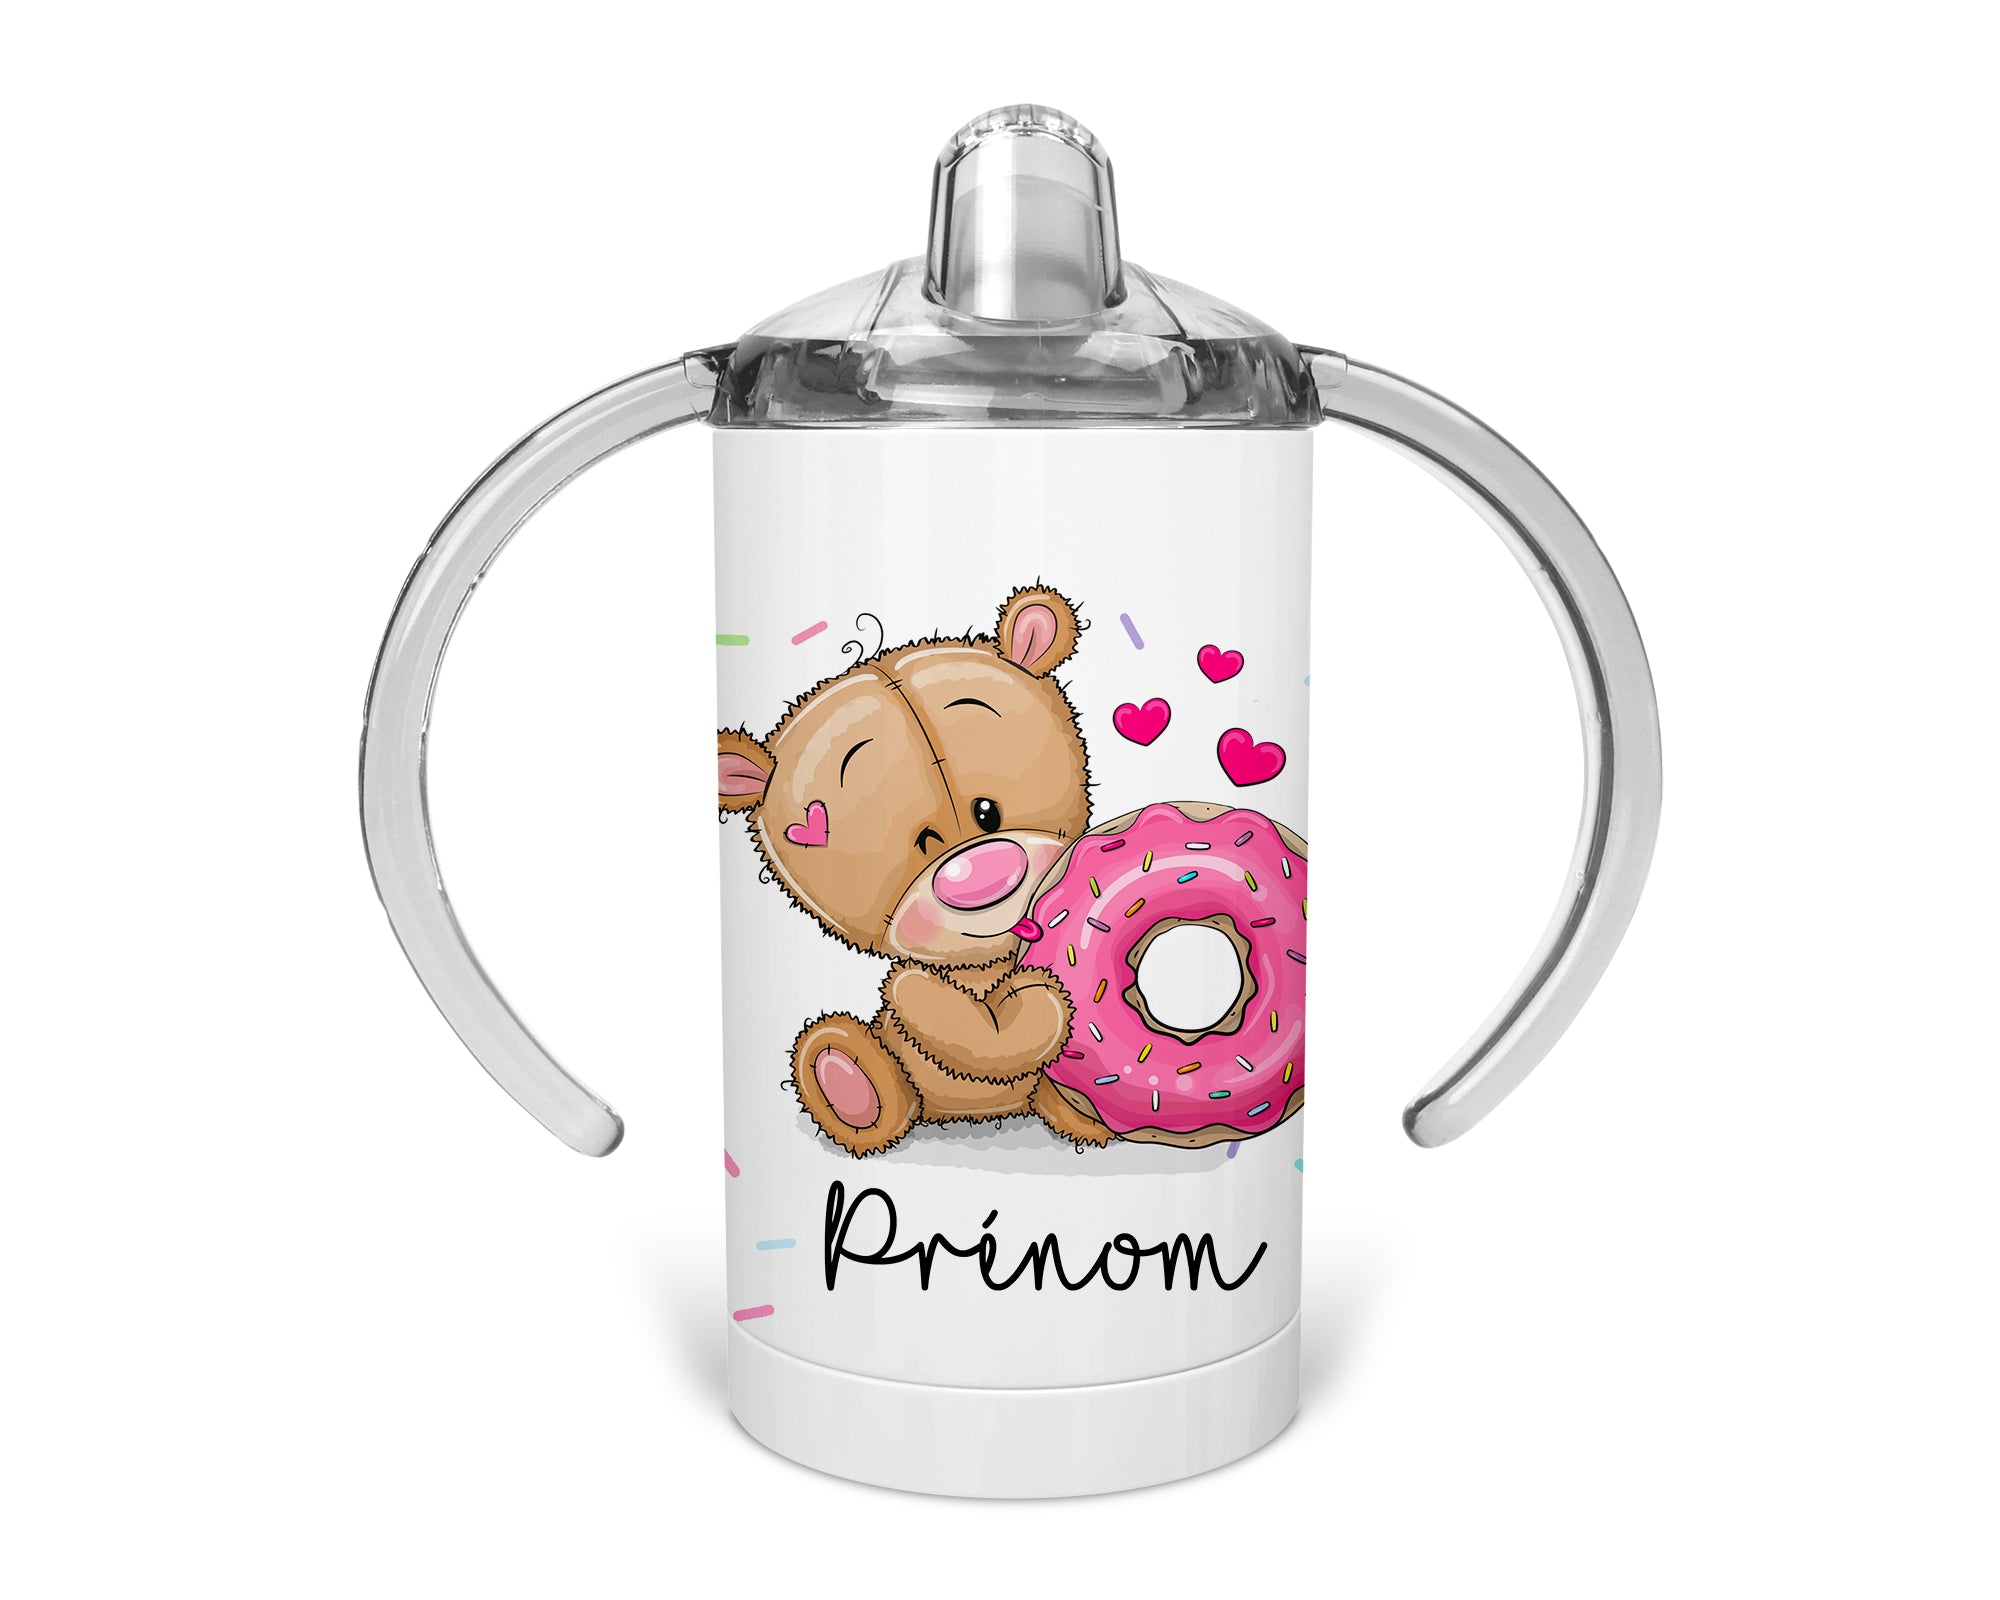 Verre Bebe Isotherme Personnalisable Ourson Emano